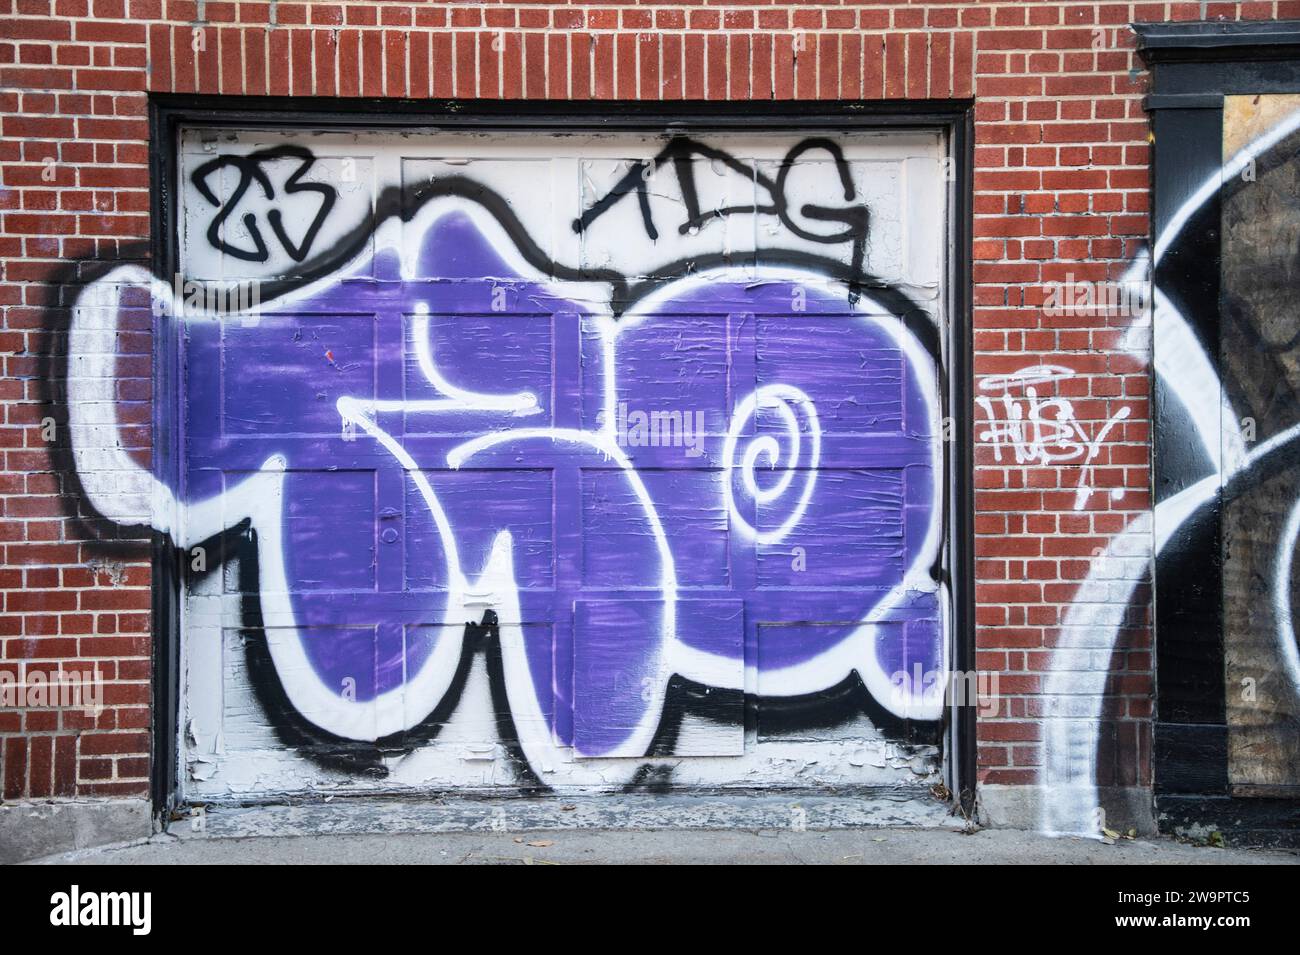 Graffiti on garage roll up door in downtown Montreal, Quebec, Canada Stock Photo